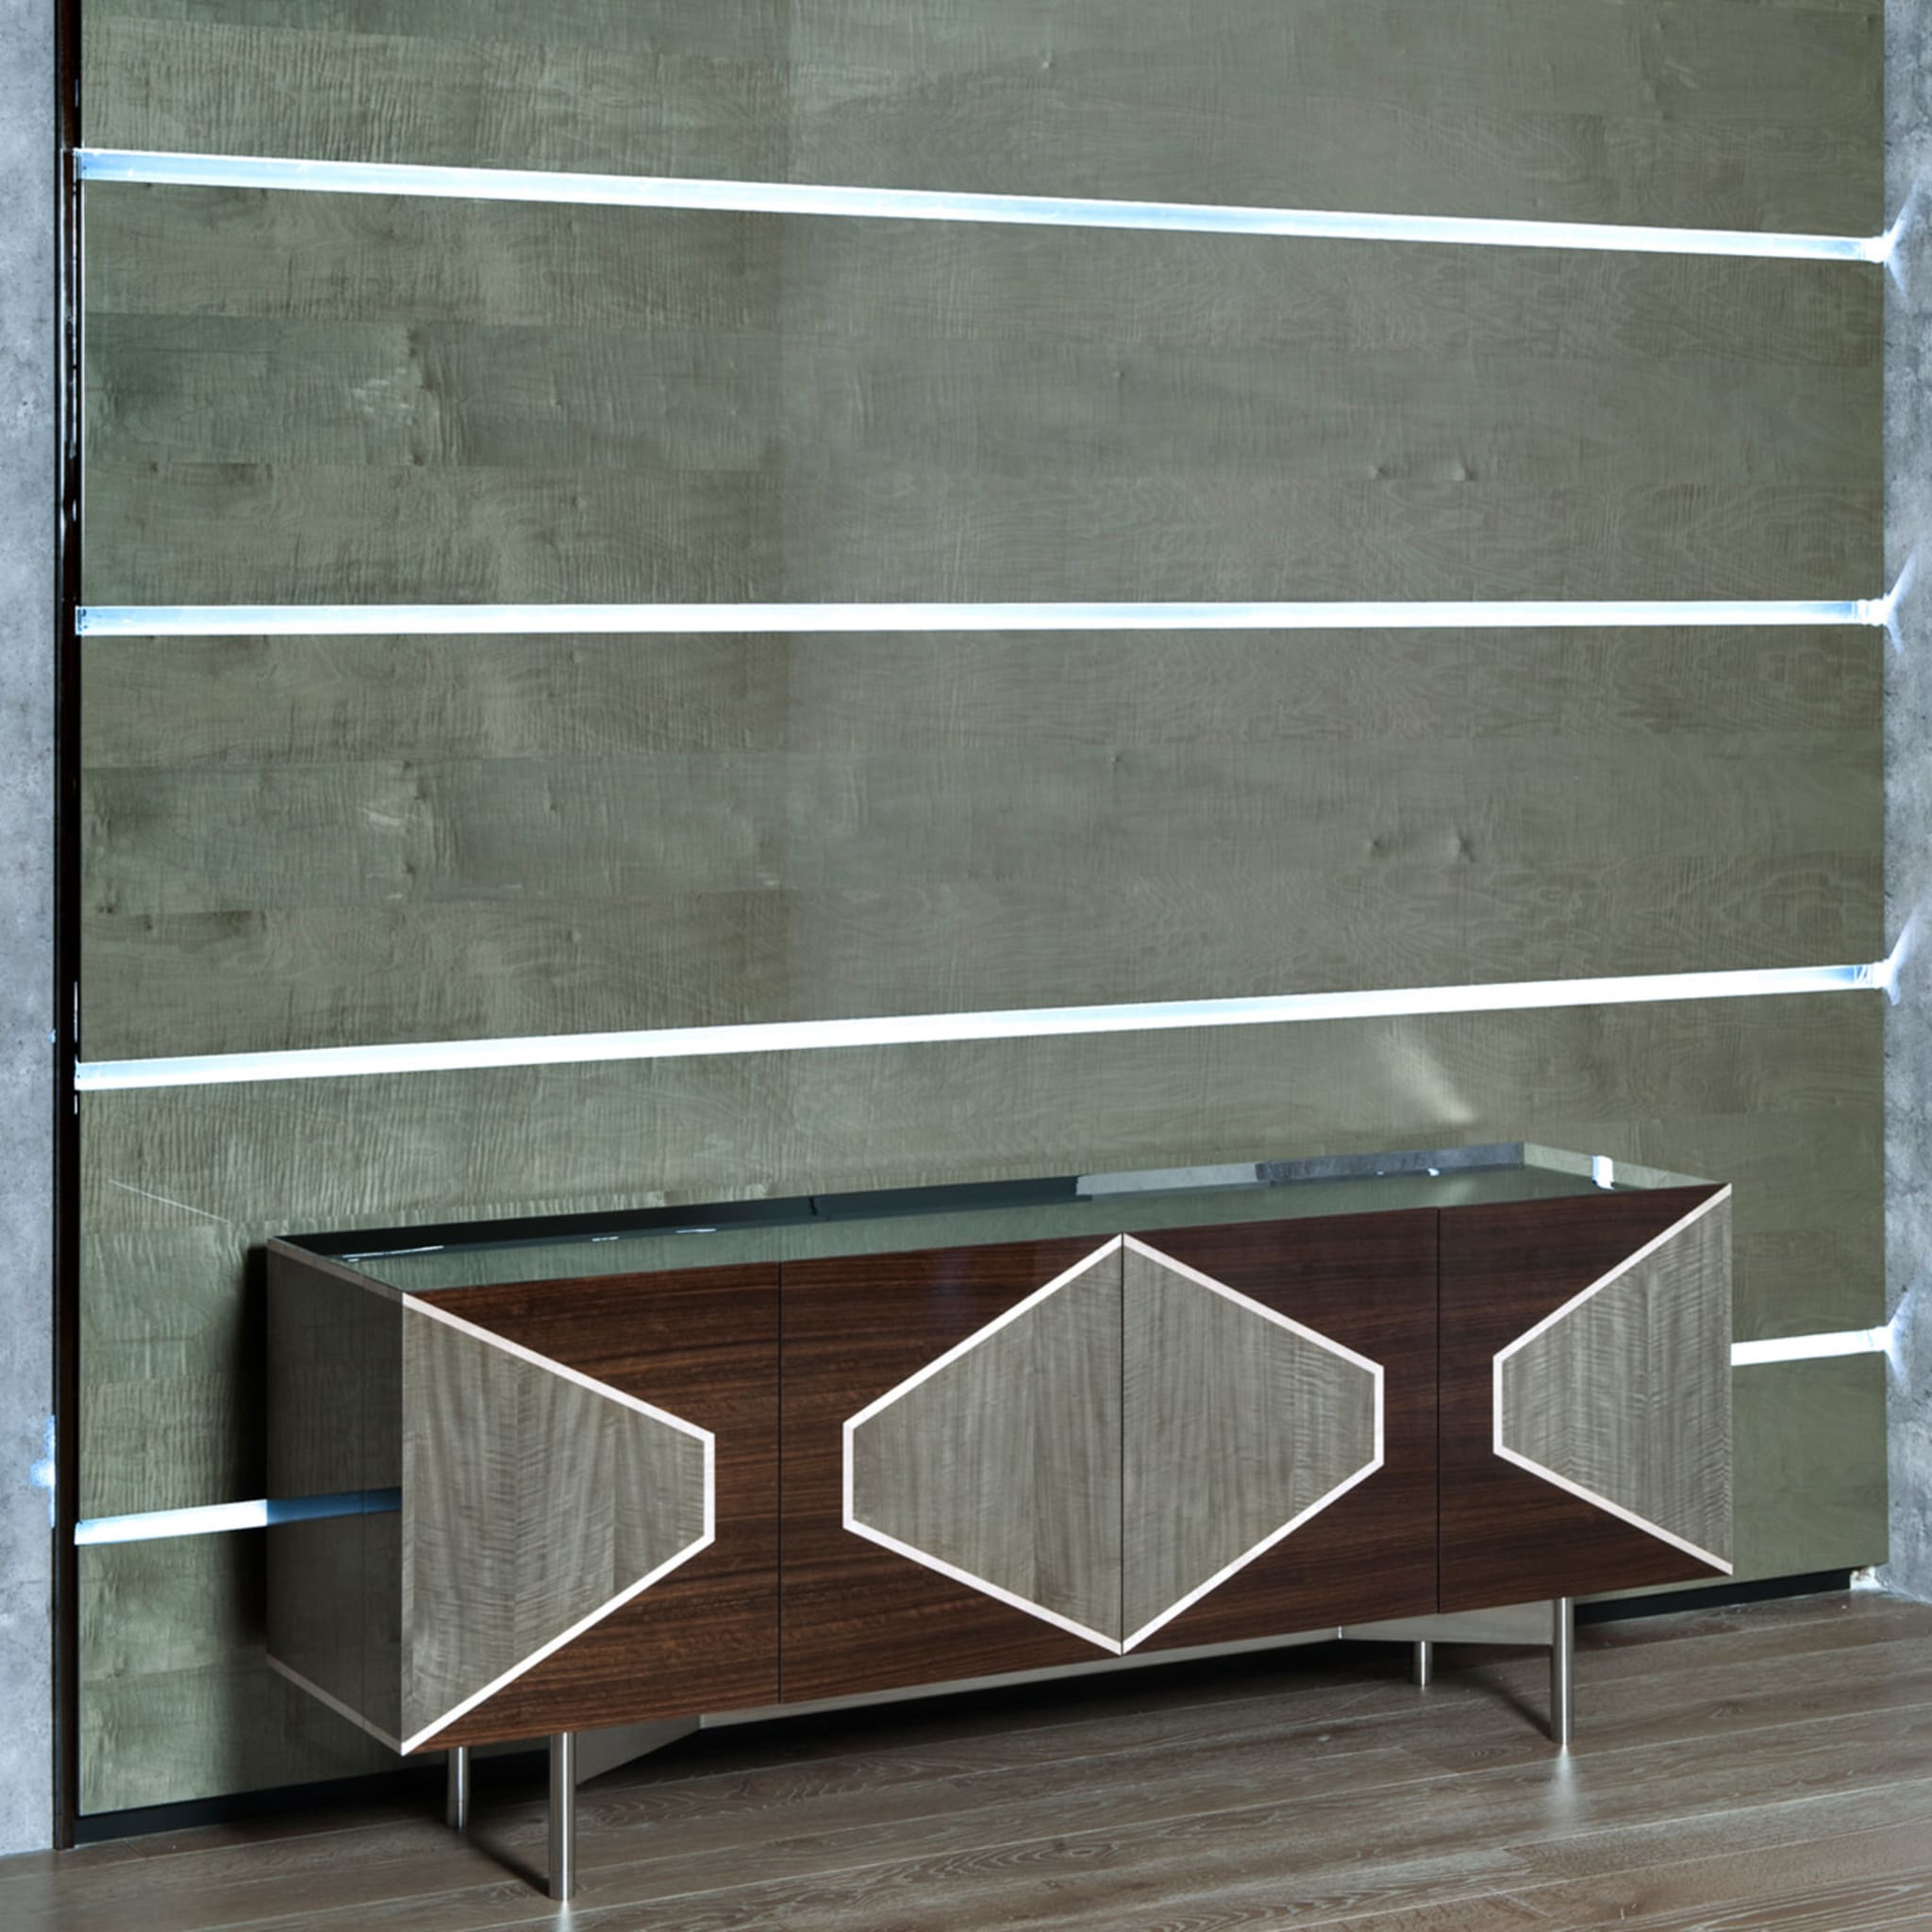 For Him Polished Sideboard - Alternative view 1